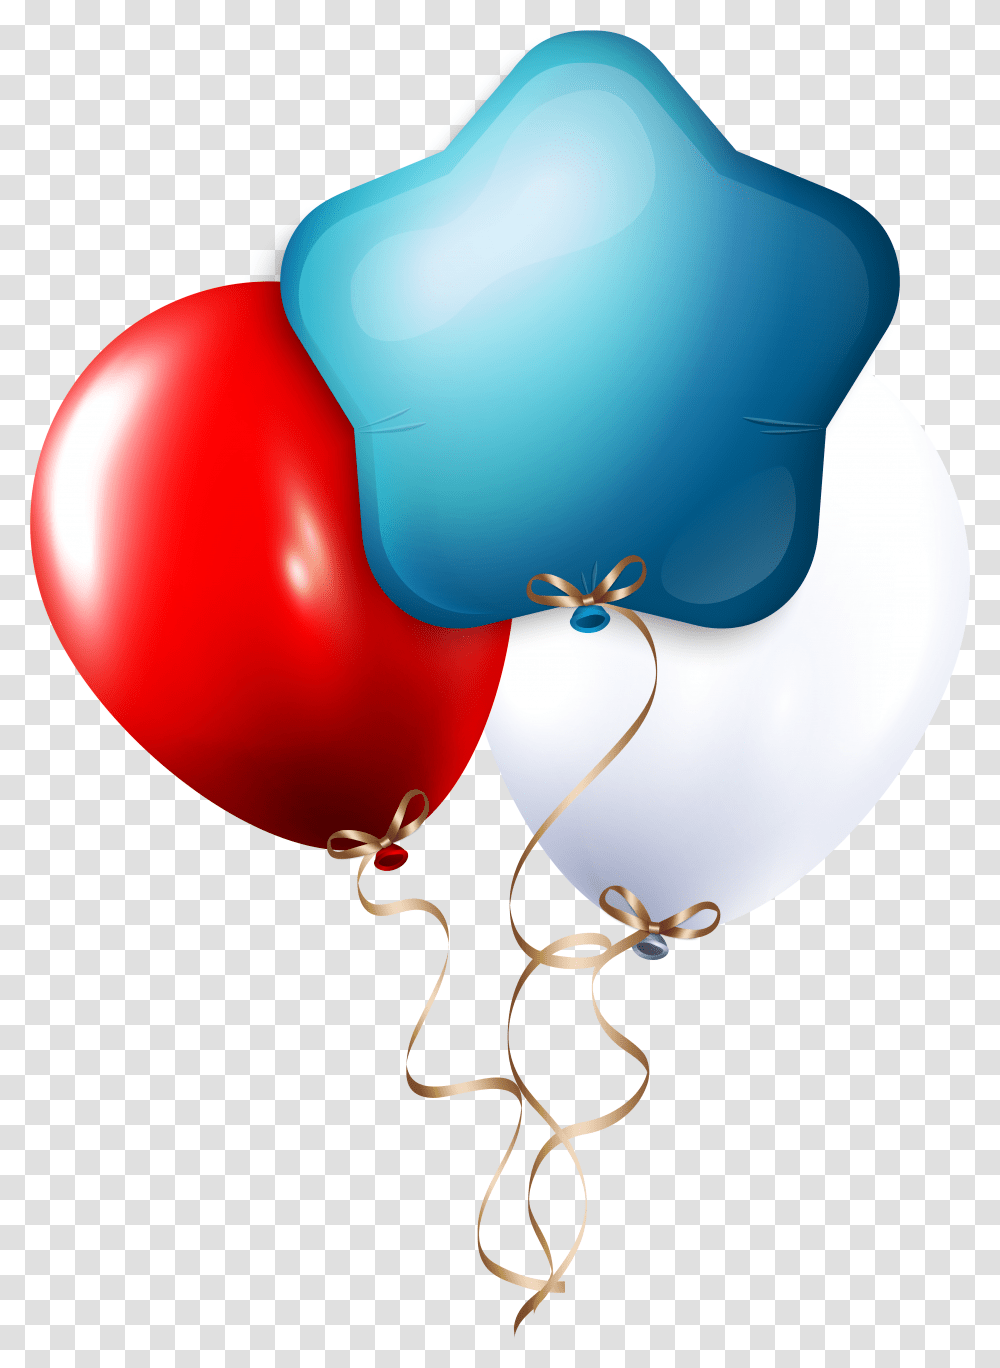 Two Balloons Balloon Red Blue Transparent Png